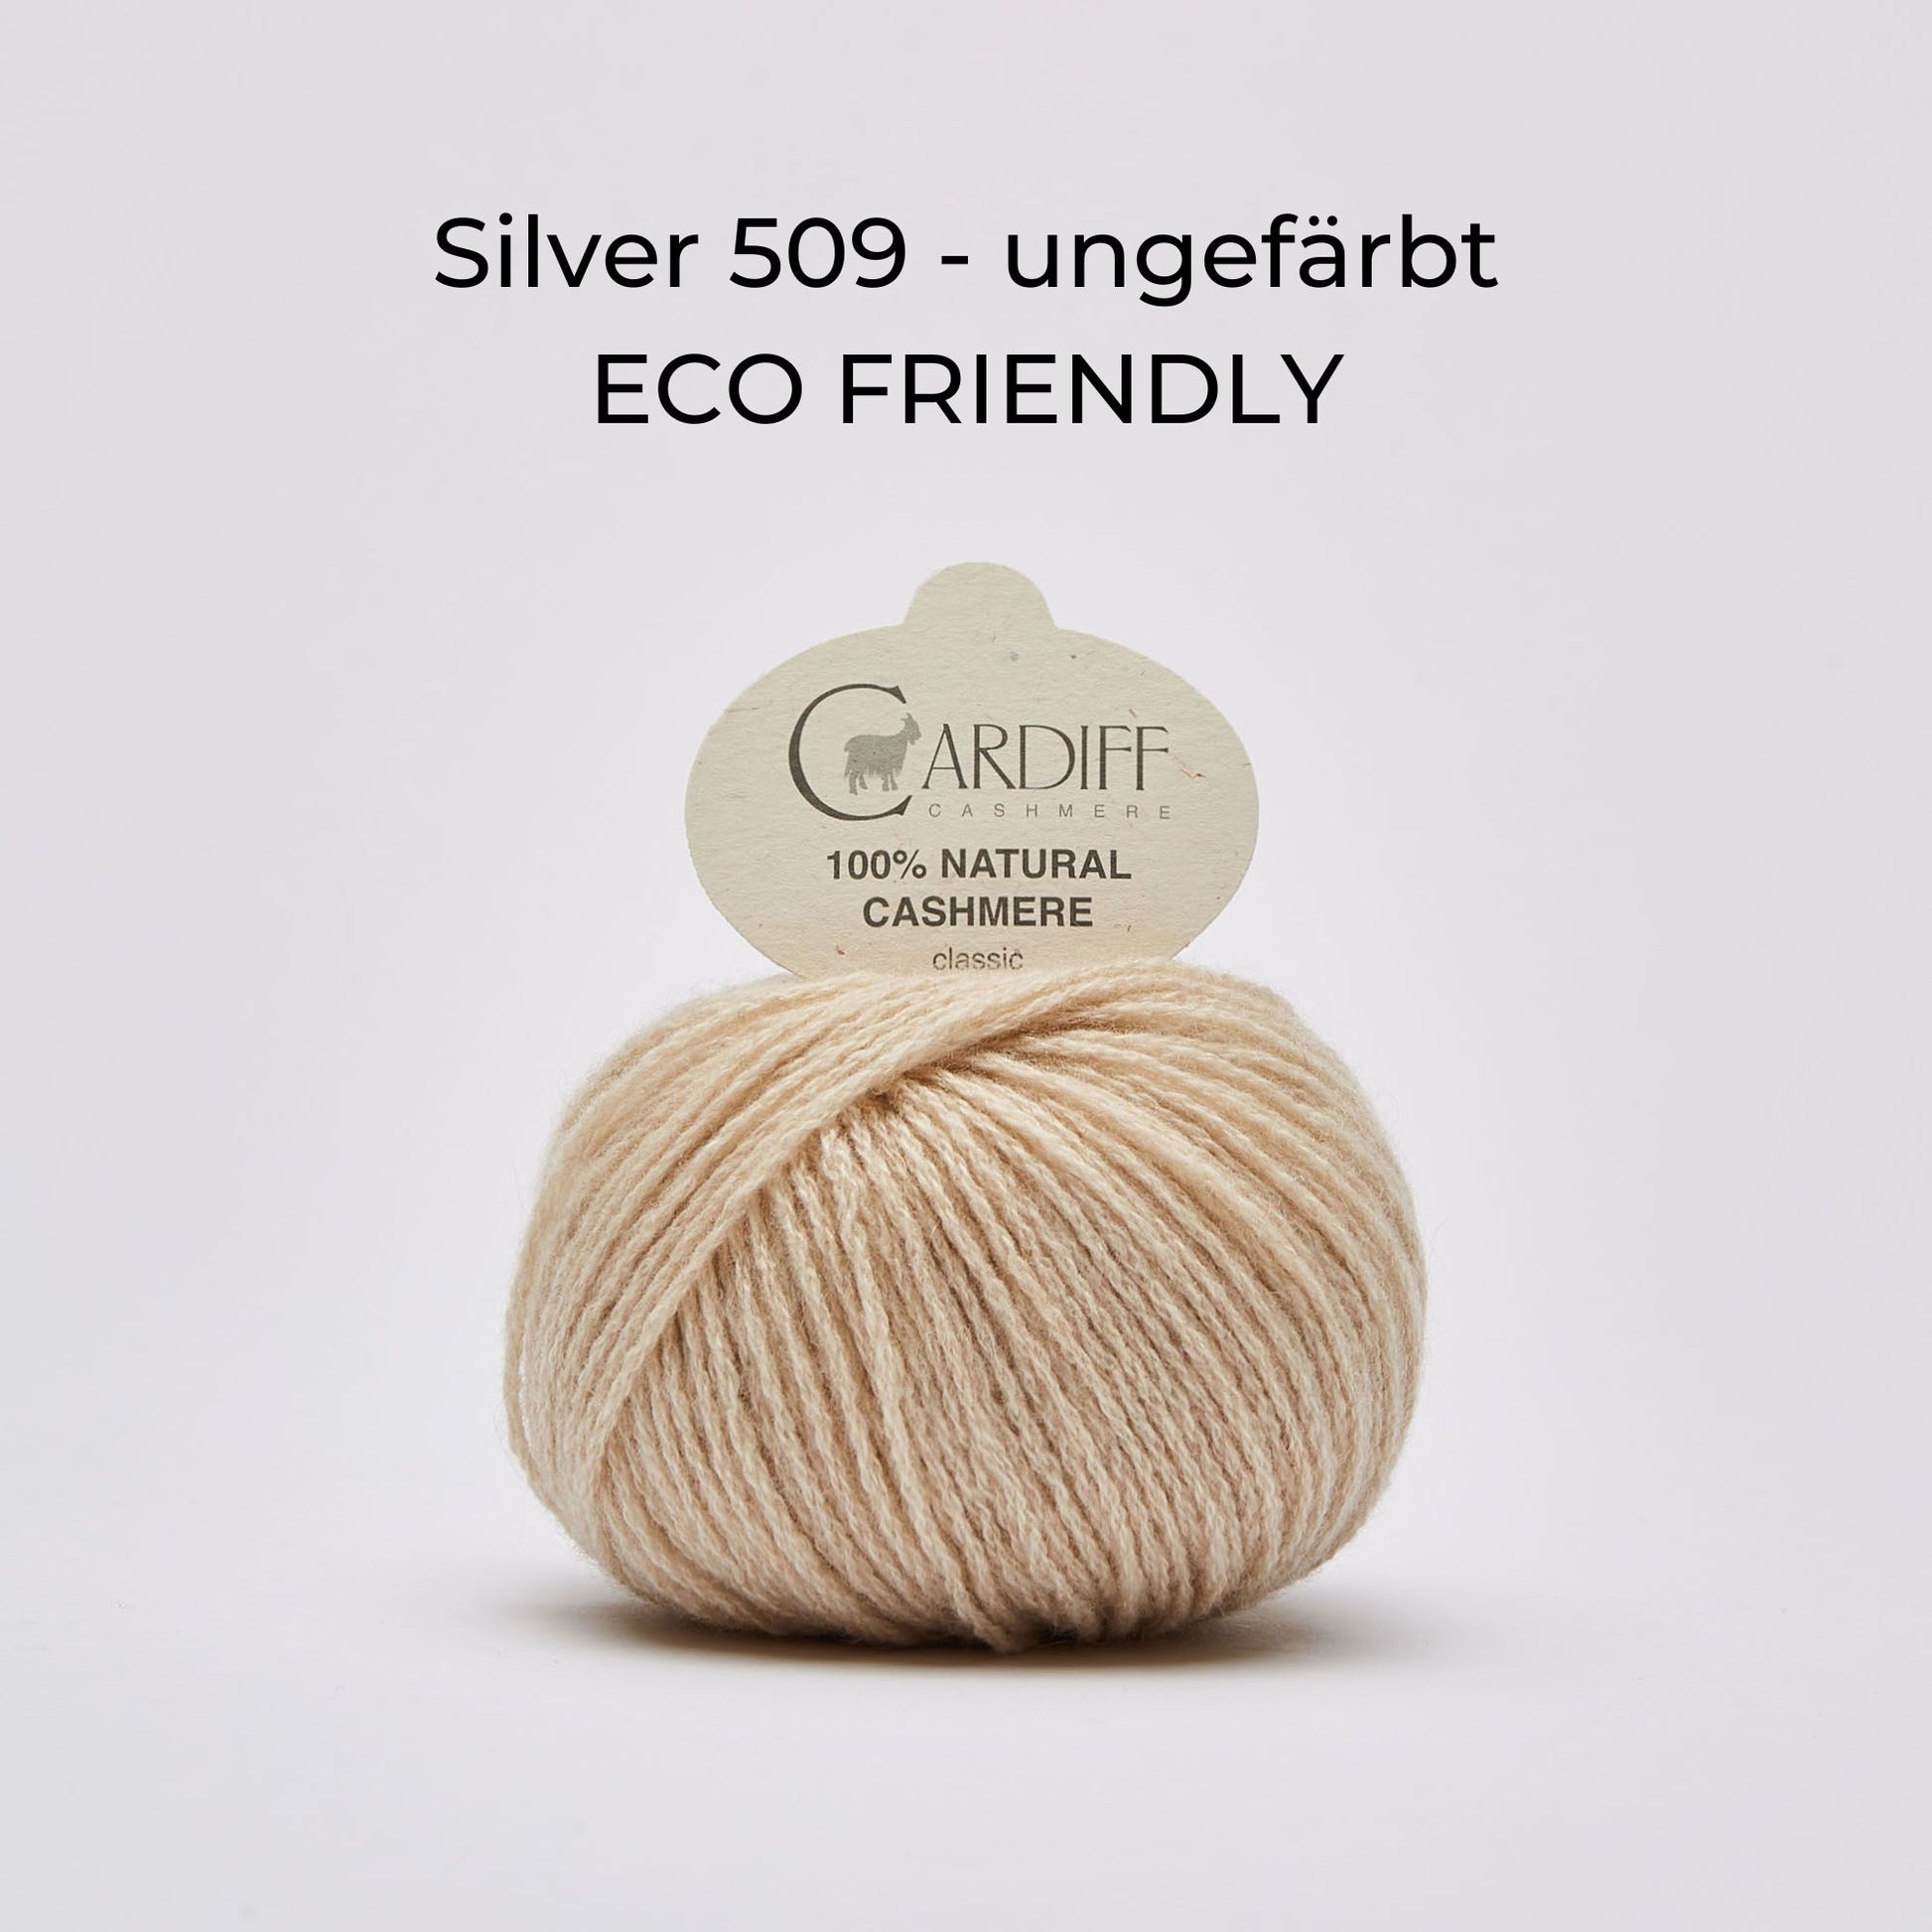 Wollknäuel, Cardiff Cashmere Classic, Farbe Silver 509, Beige